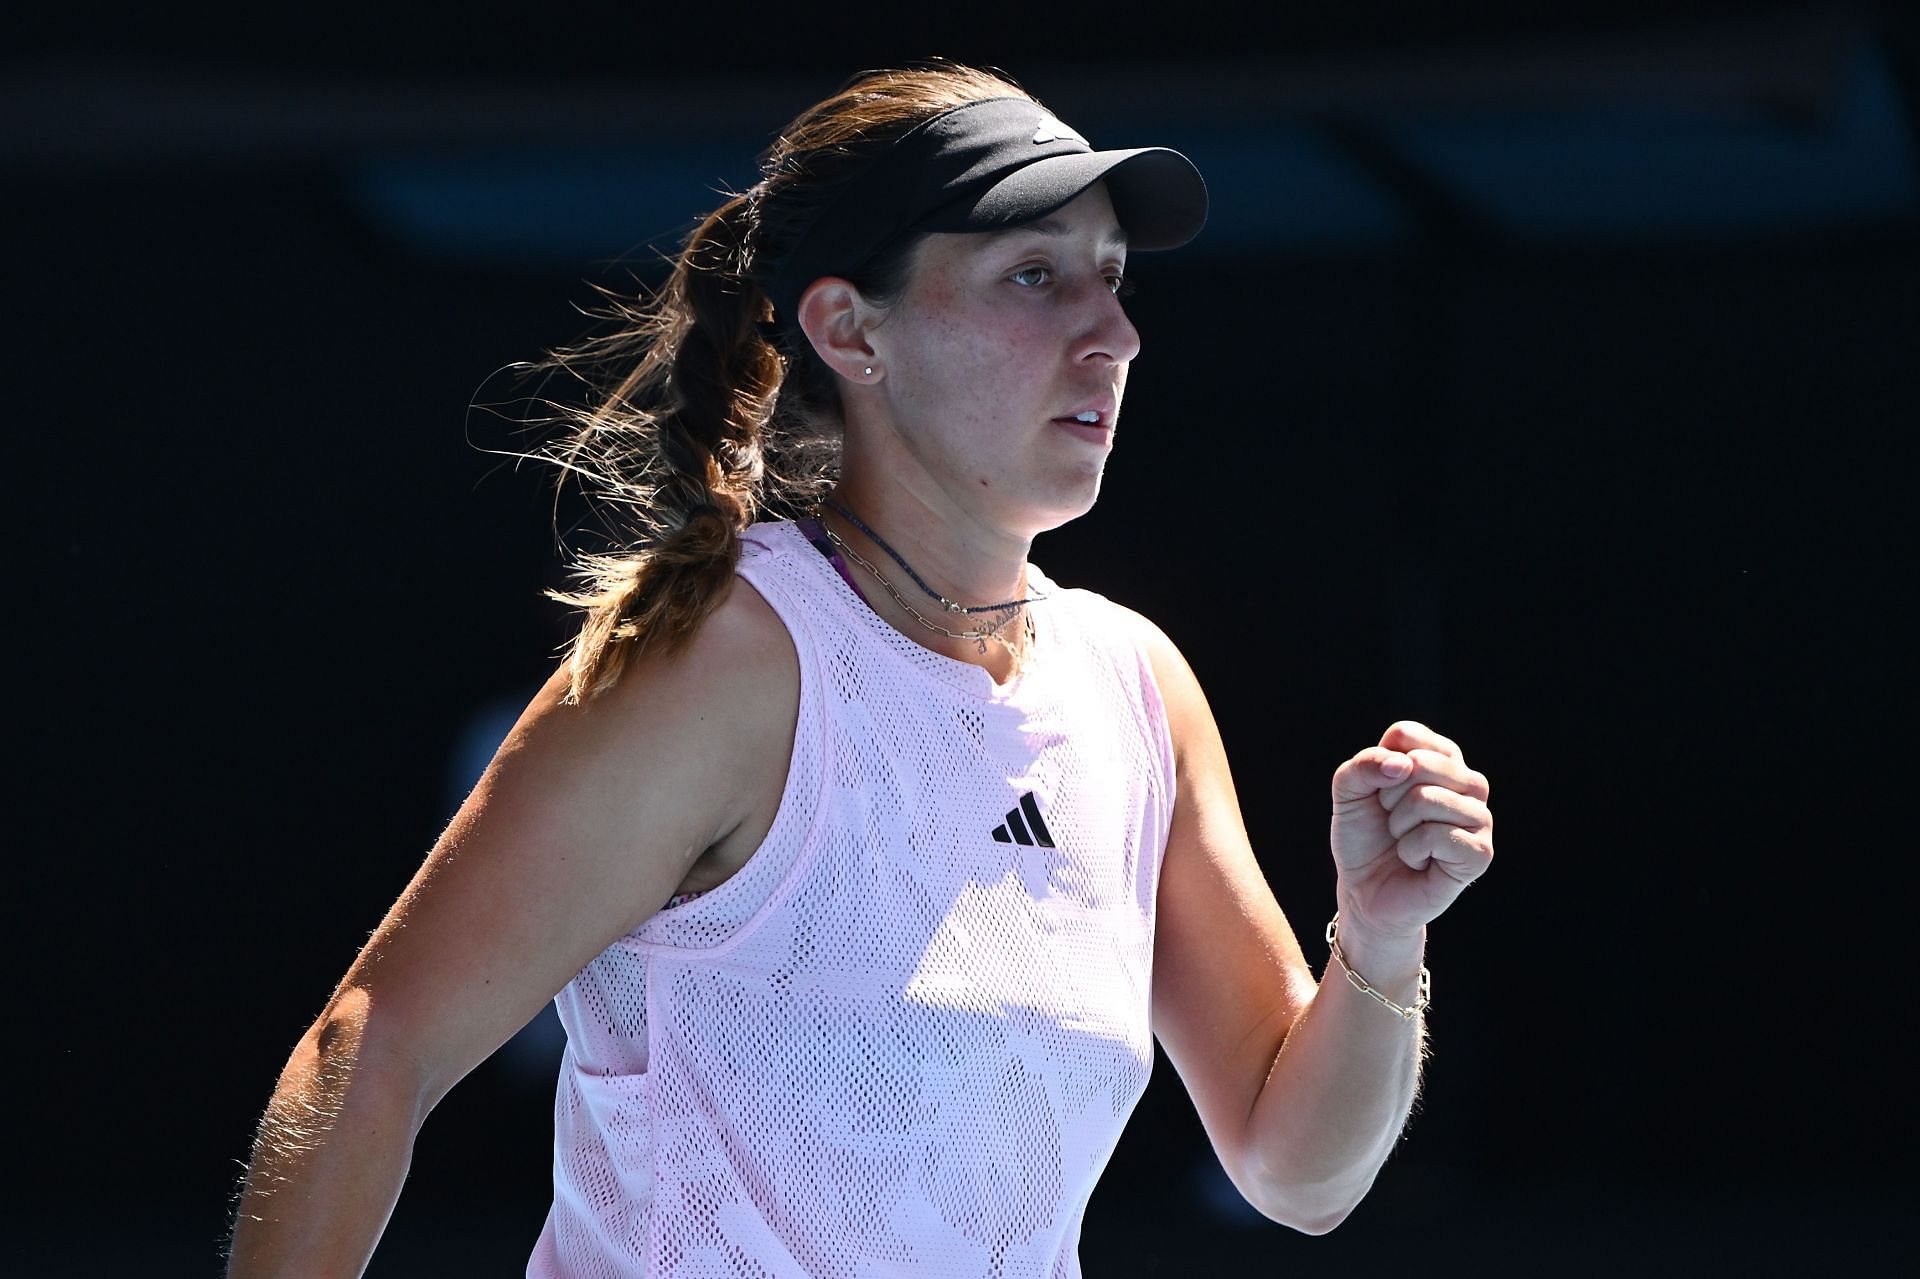 The 28-year-old made her third back-to-back quarterfinal at 2023 Australian Open